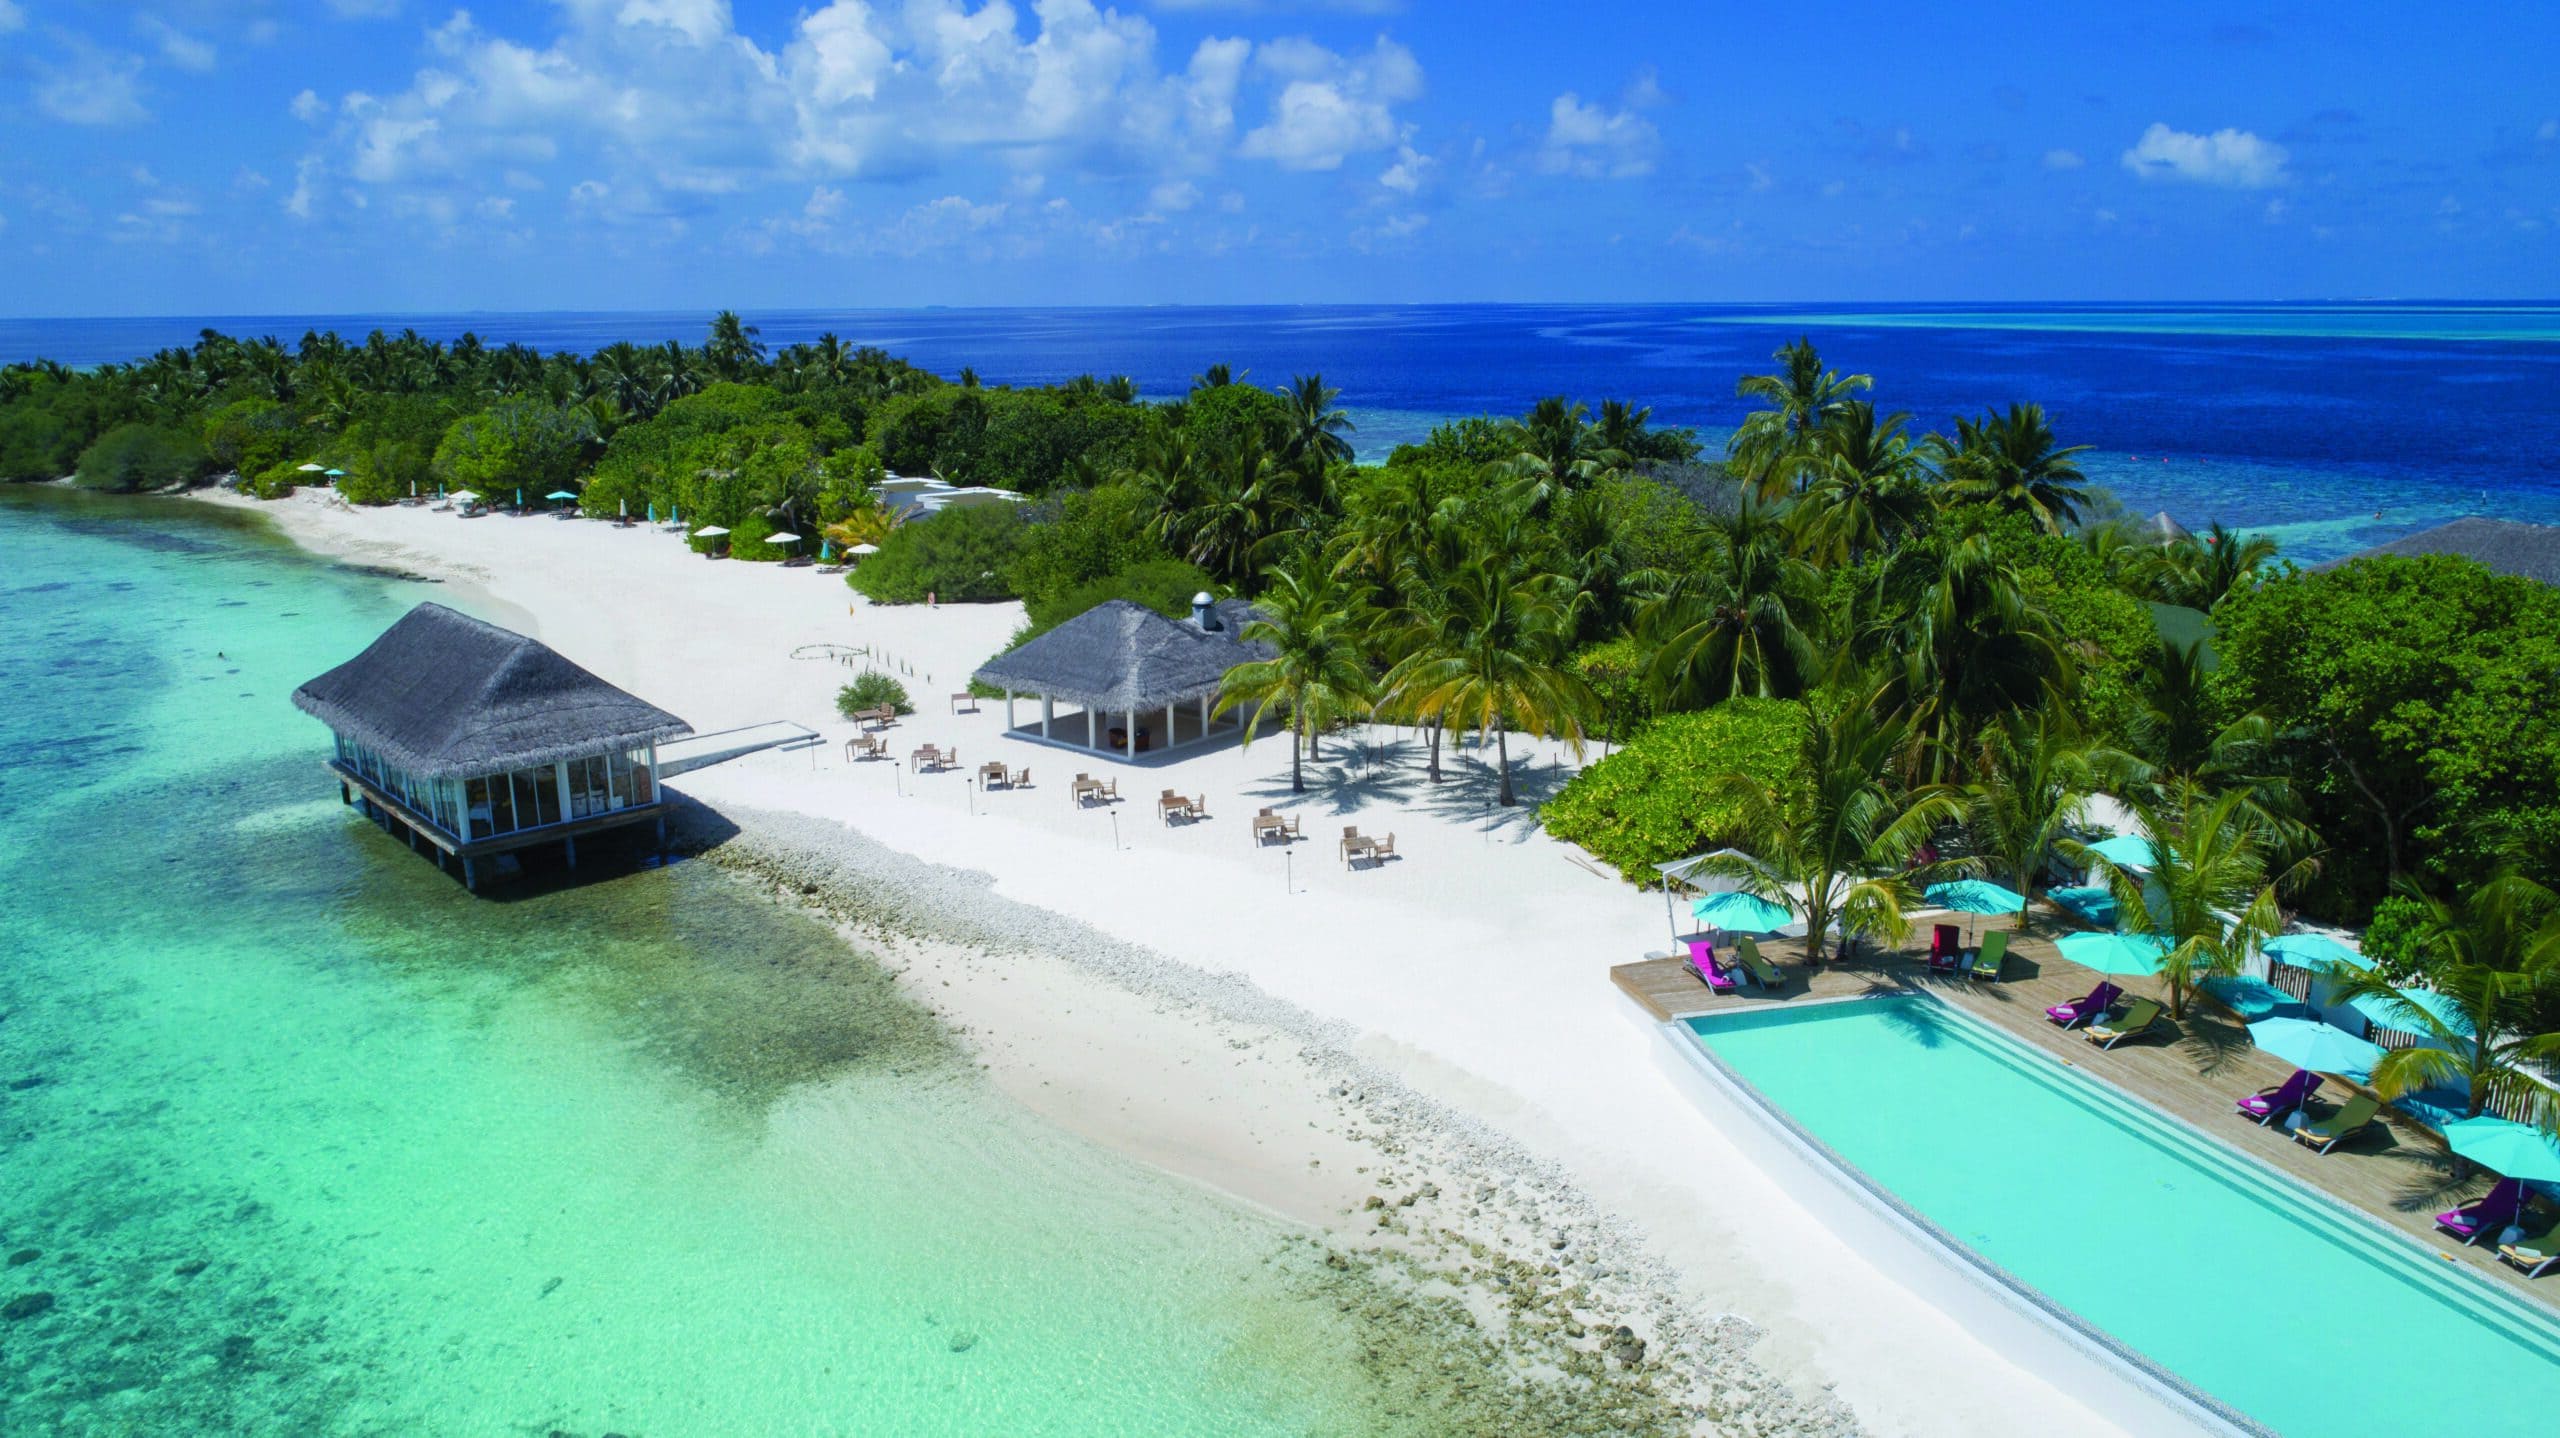 Aerial view of OBLU by Atmosphere resort in the Maldives